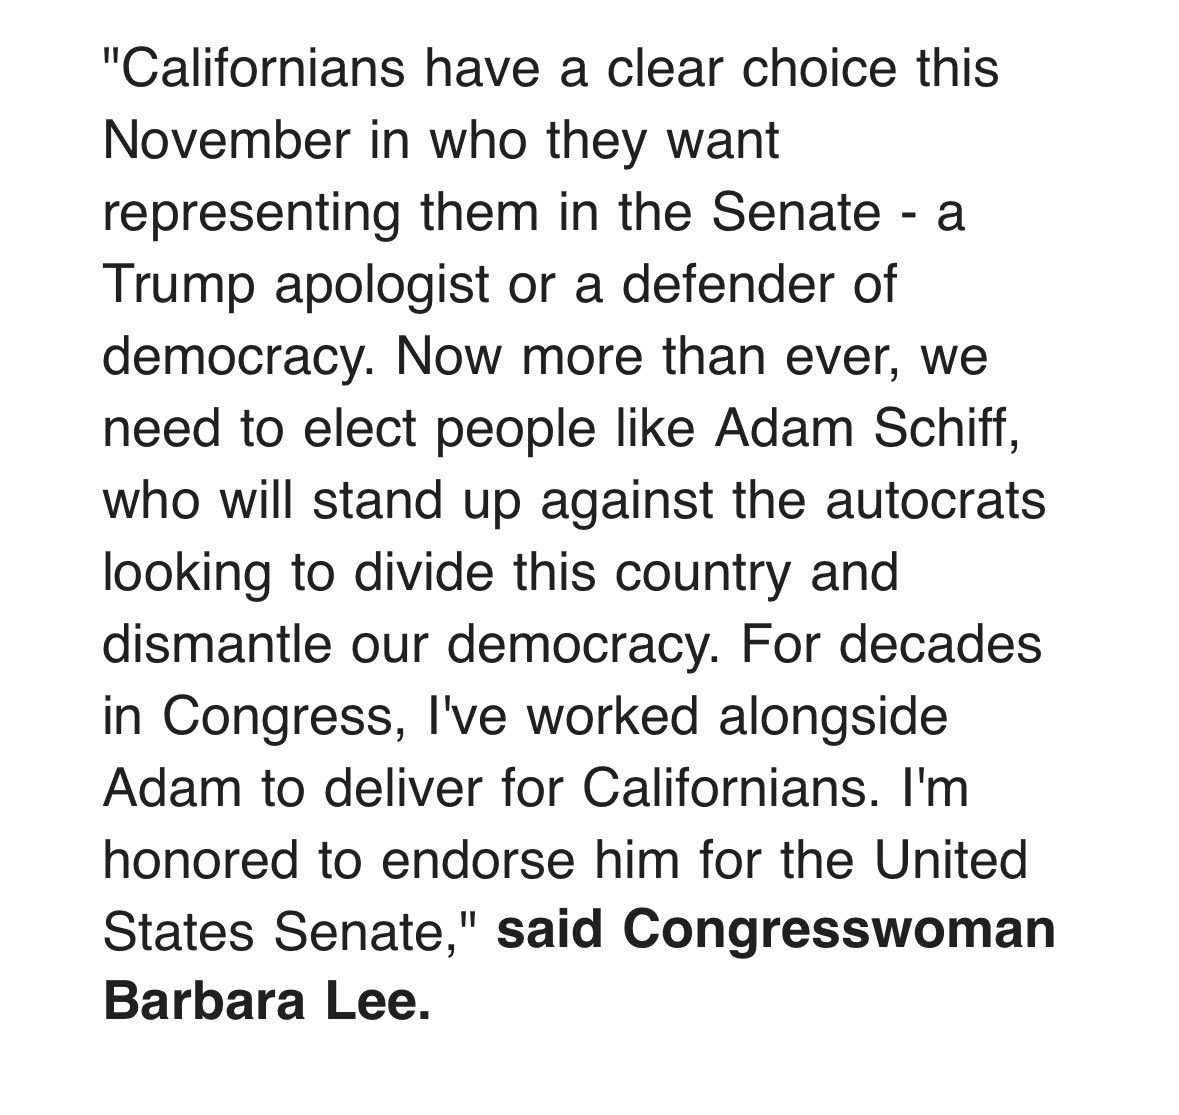 New: #Oakland’s @BarbaraLeeForCA endorses @AdamSchiff for Senate, after losing to her fellow Democrat in the primary. (It’s not as if she would ever endorse Steve Garvey over Schiff…)